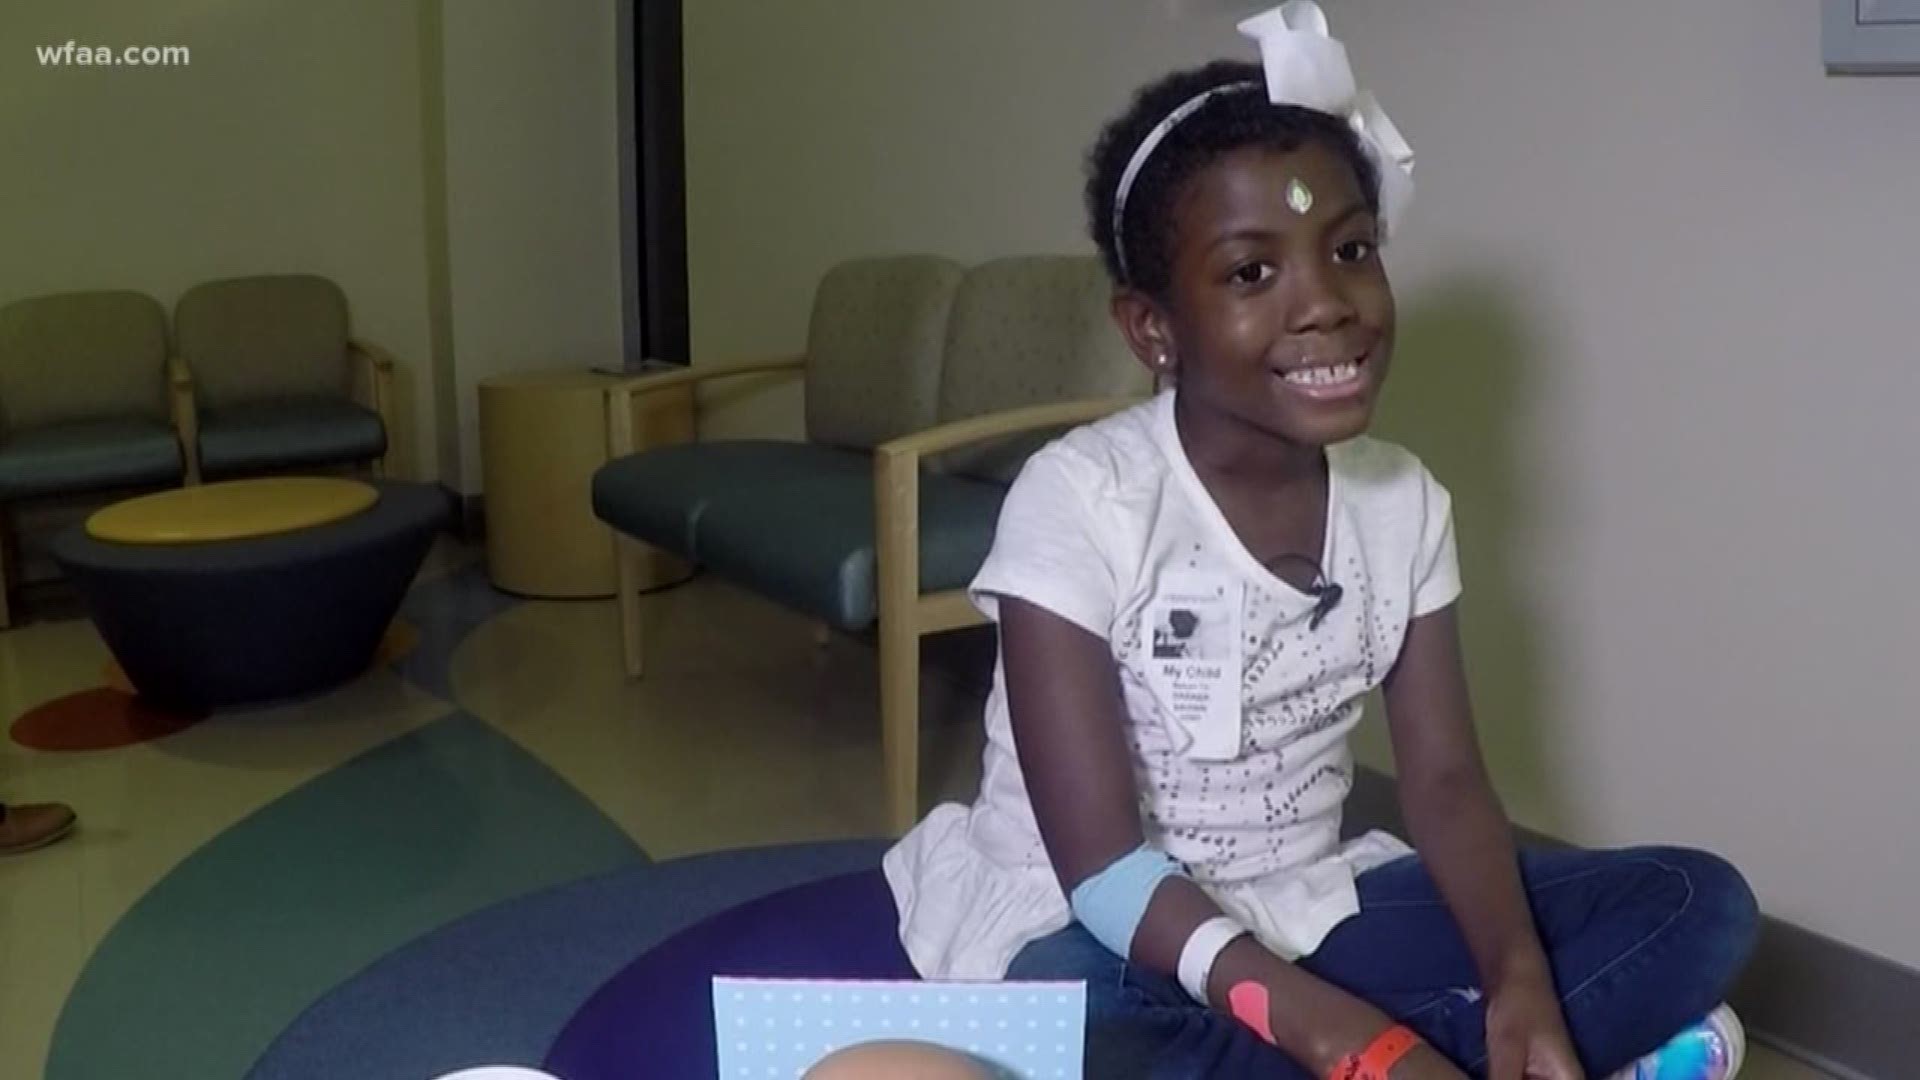 Kylah was diagnosed with a rare blood disorder when she was just two. Her grandma says Kylah has spent every year of her life in and out of the hospital.